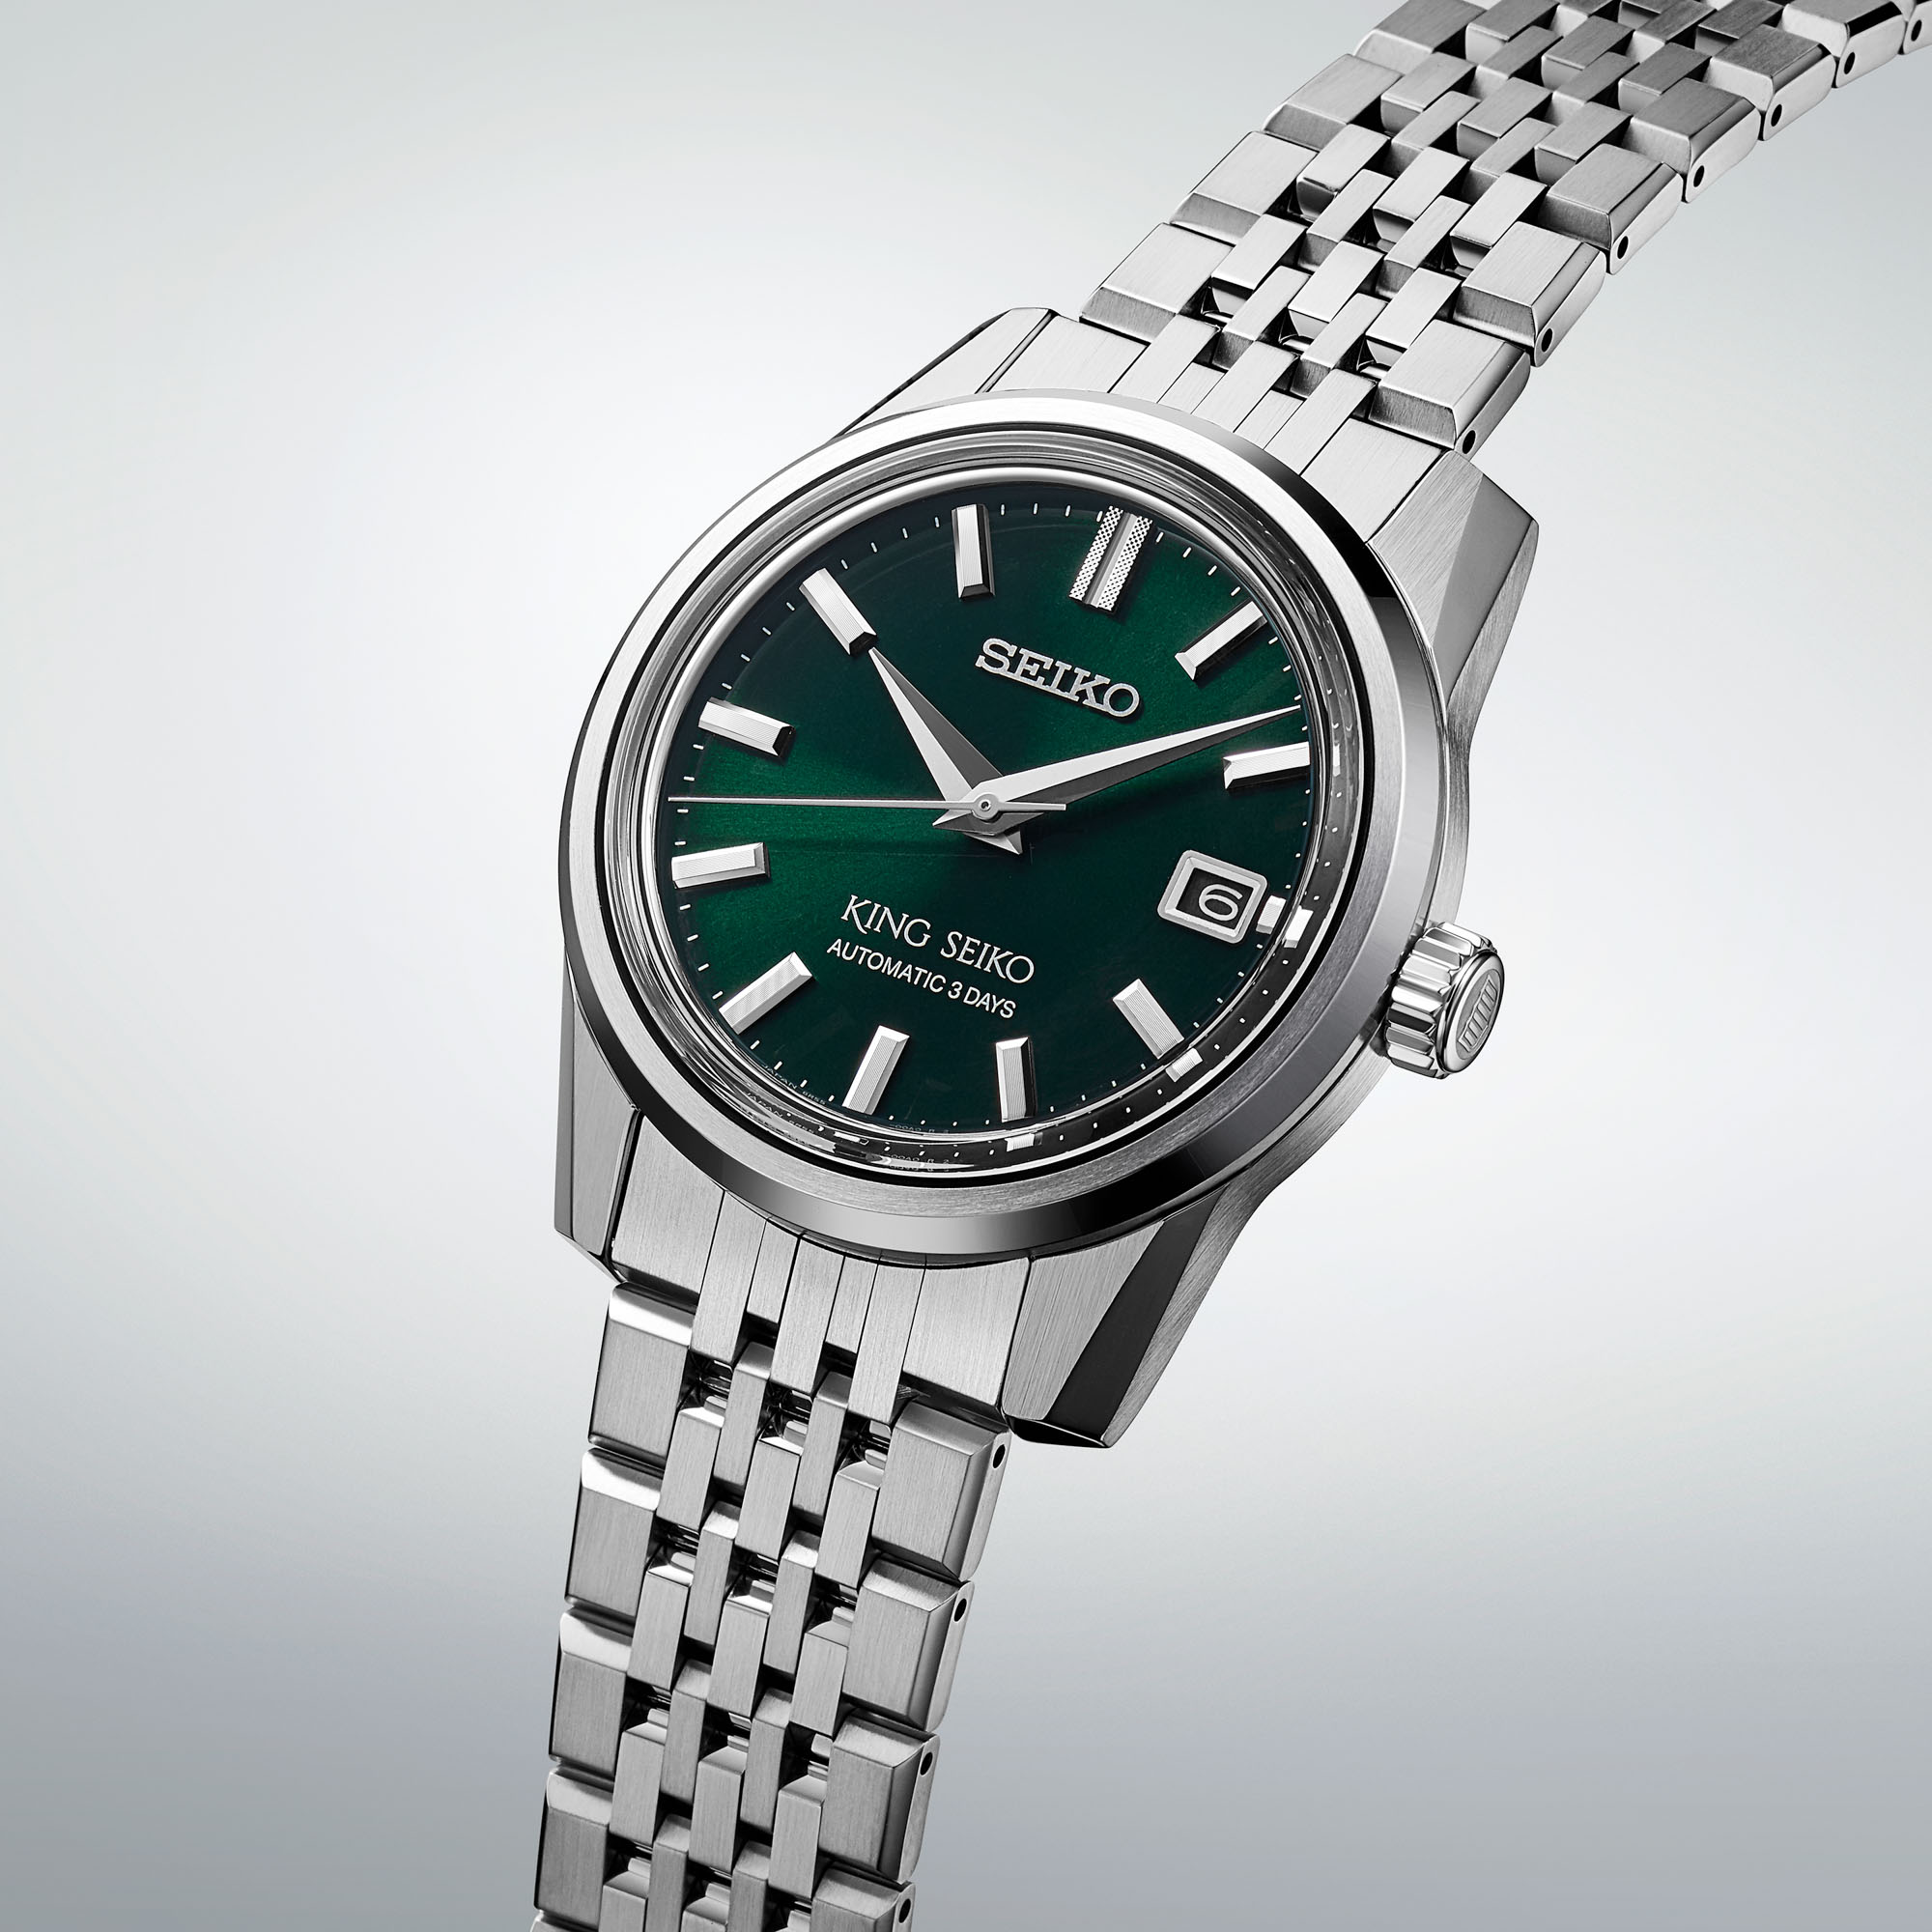 Seiko Unveils The Seiko Watchmaking 110th Anniversary King Seiko SPB365  Watch And New Core Collection 39mm Models | aBlogtoWatch